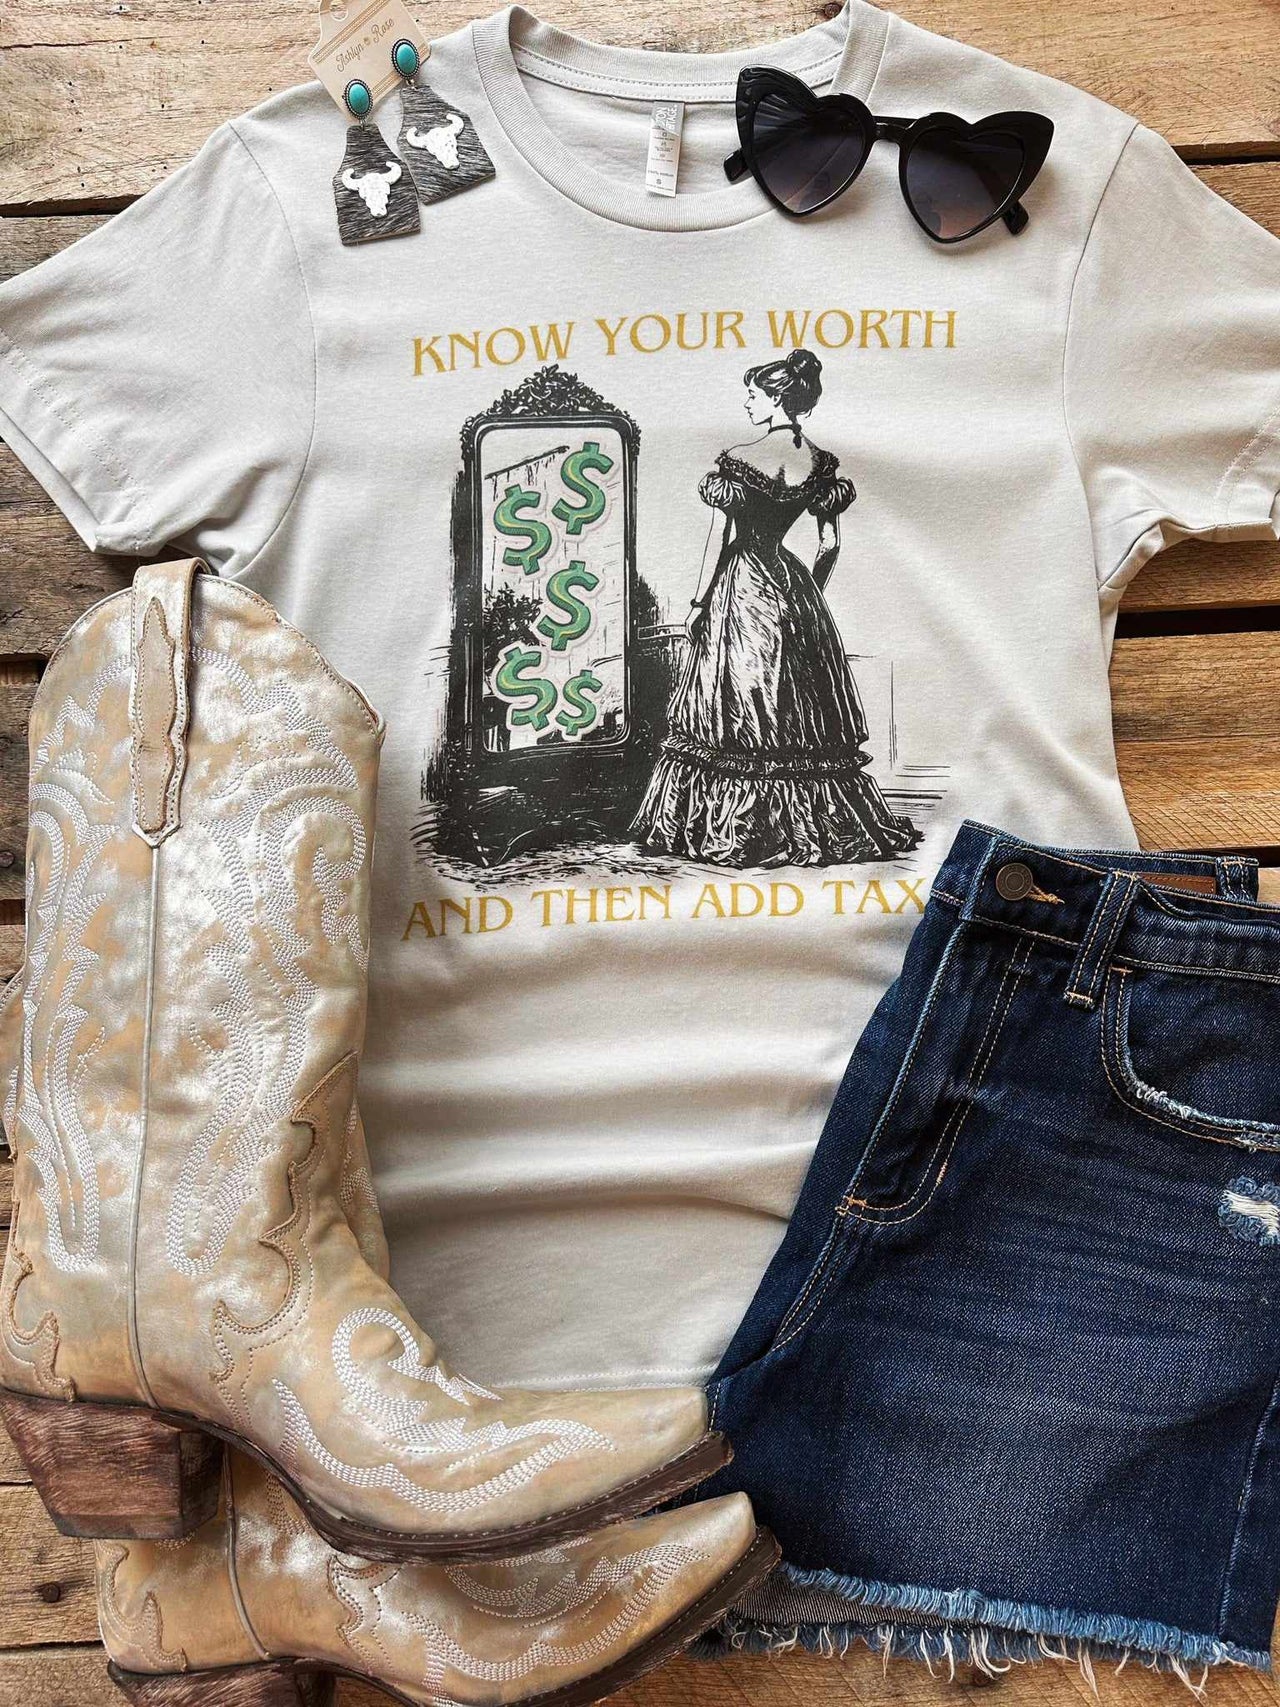 Know Your Worth T shirt